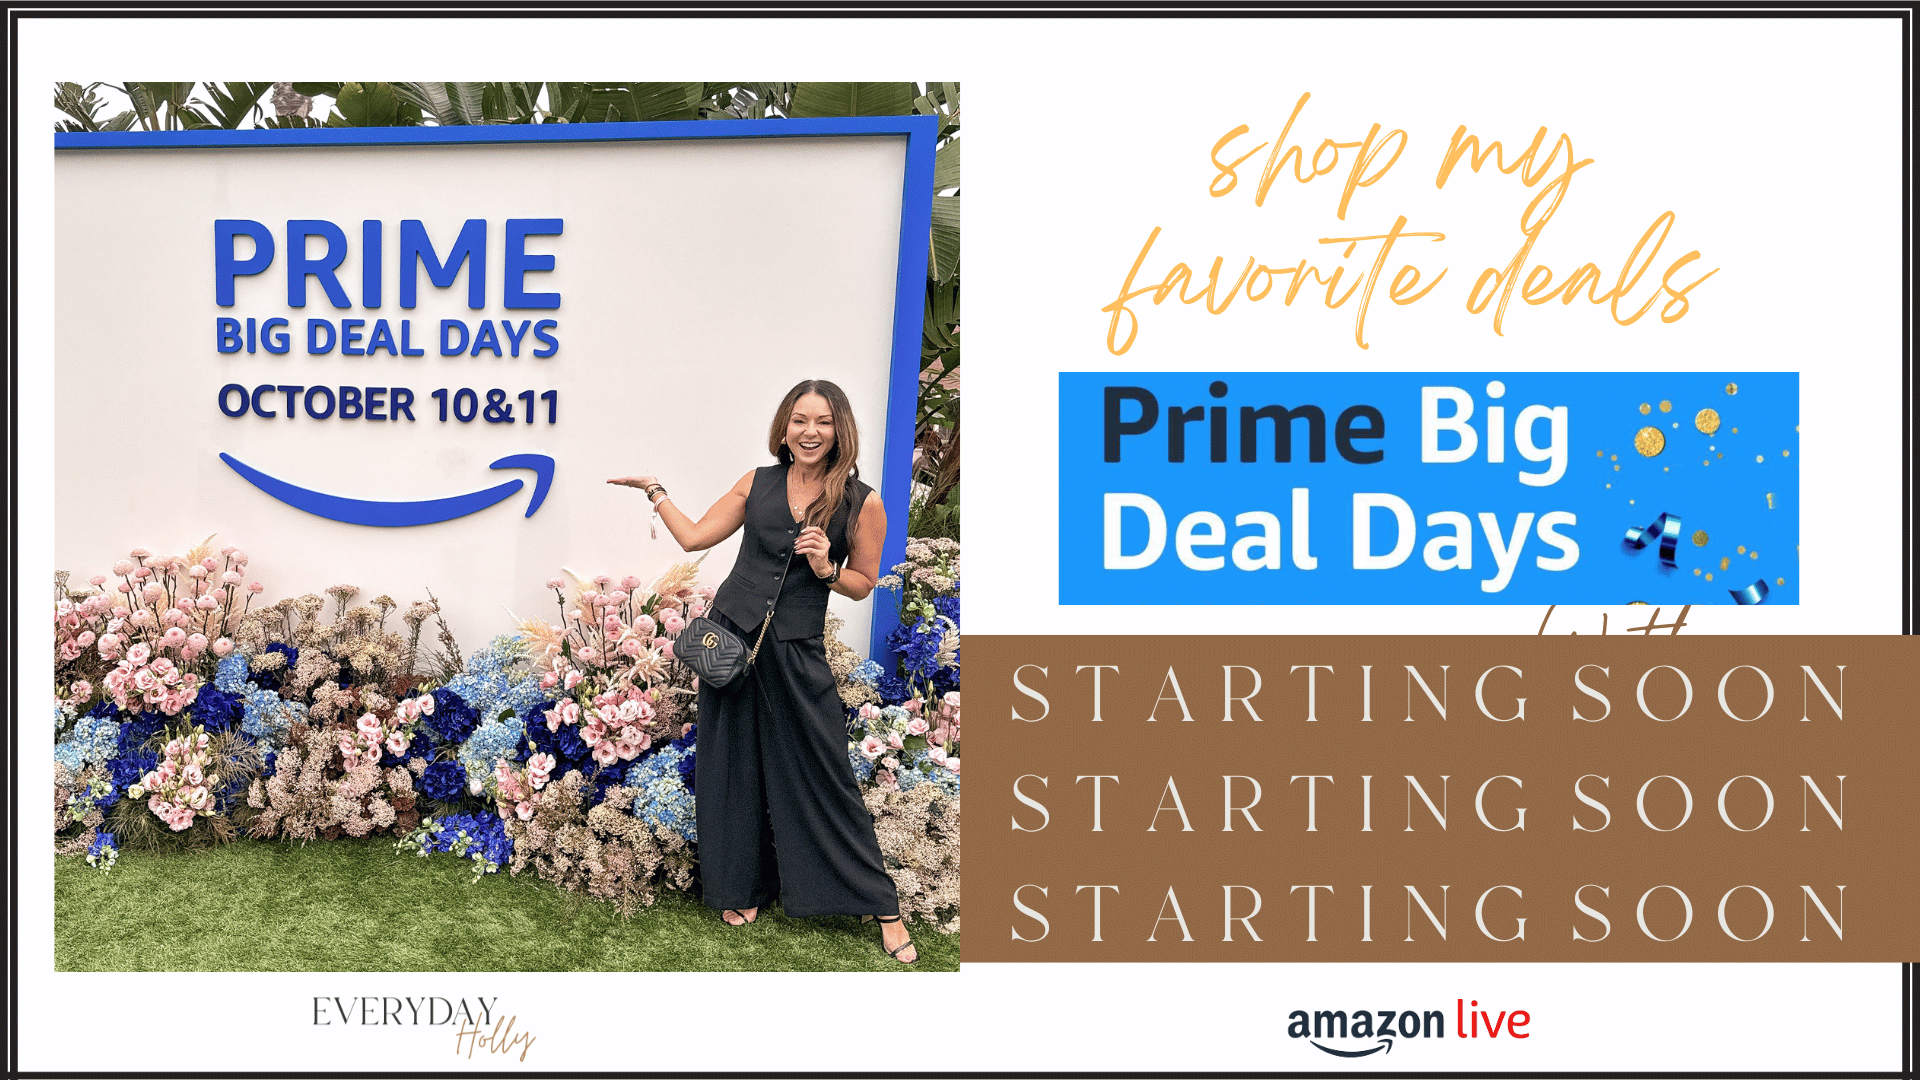 Amazon Prime Day's Best Deals | #Amazon #primeday #deals #october #live #streaming #home #beauty #fashion